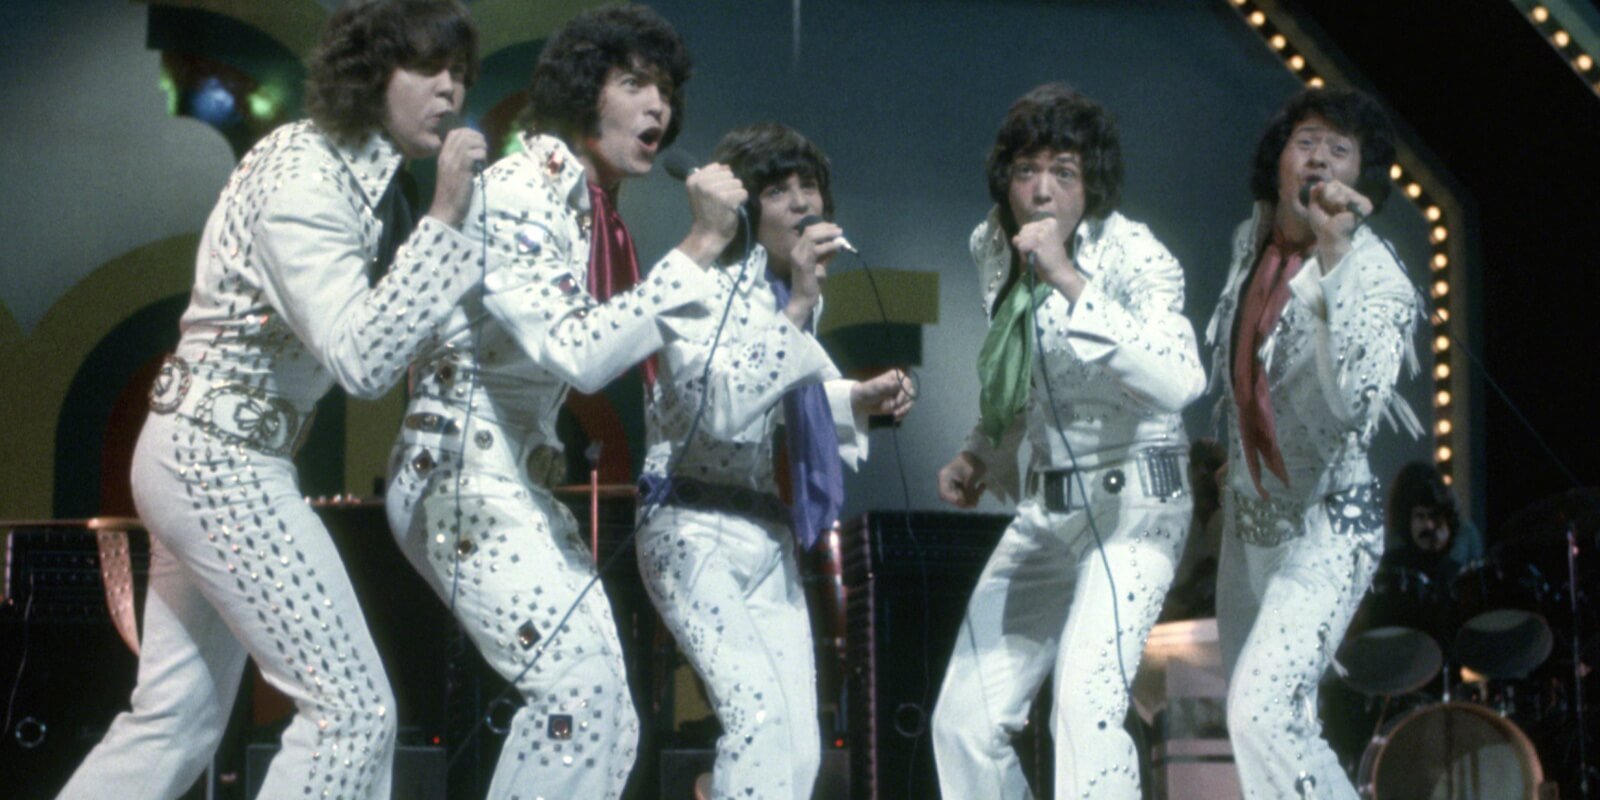 Alan, Merrill, Donny, Jay and Wayne Osmond in their Elvis-inspired jumpsuits during a performance in 1973.